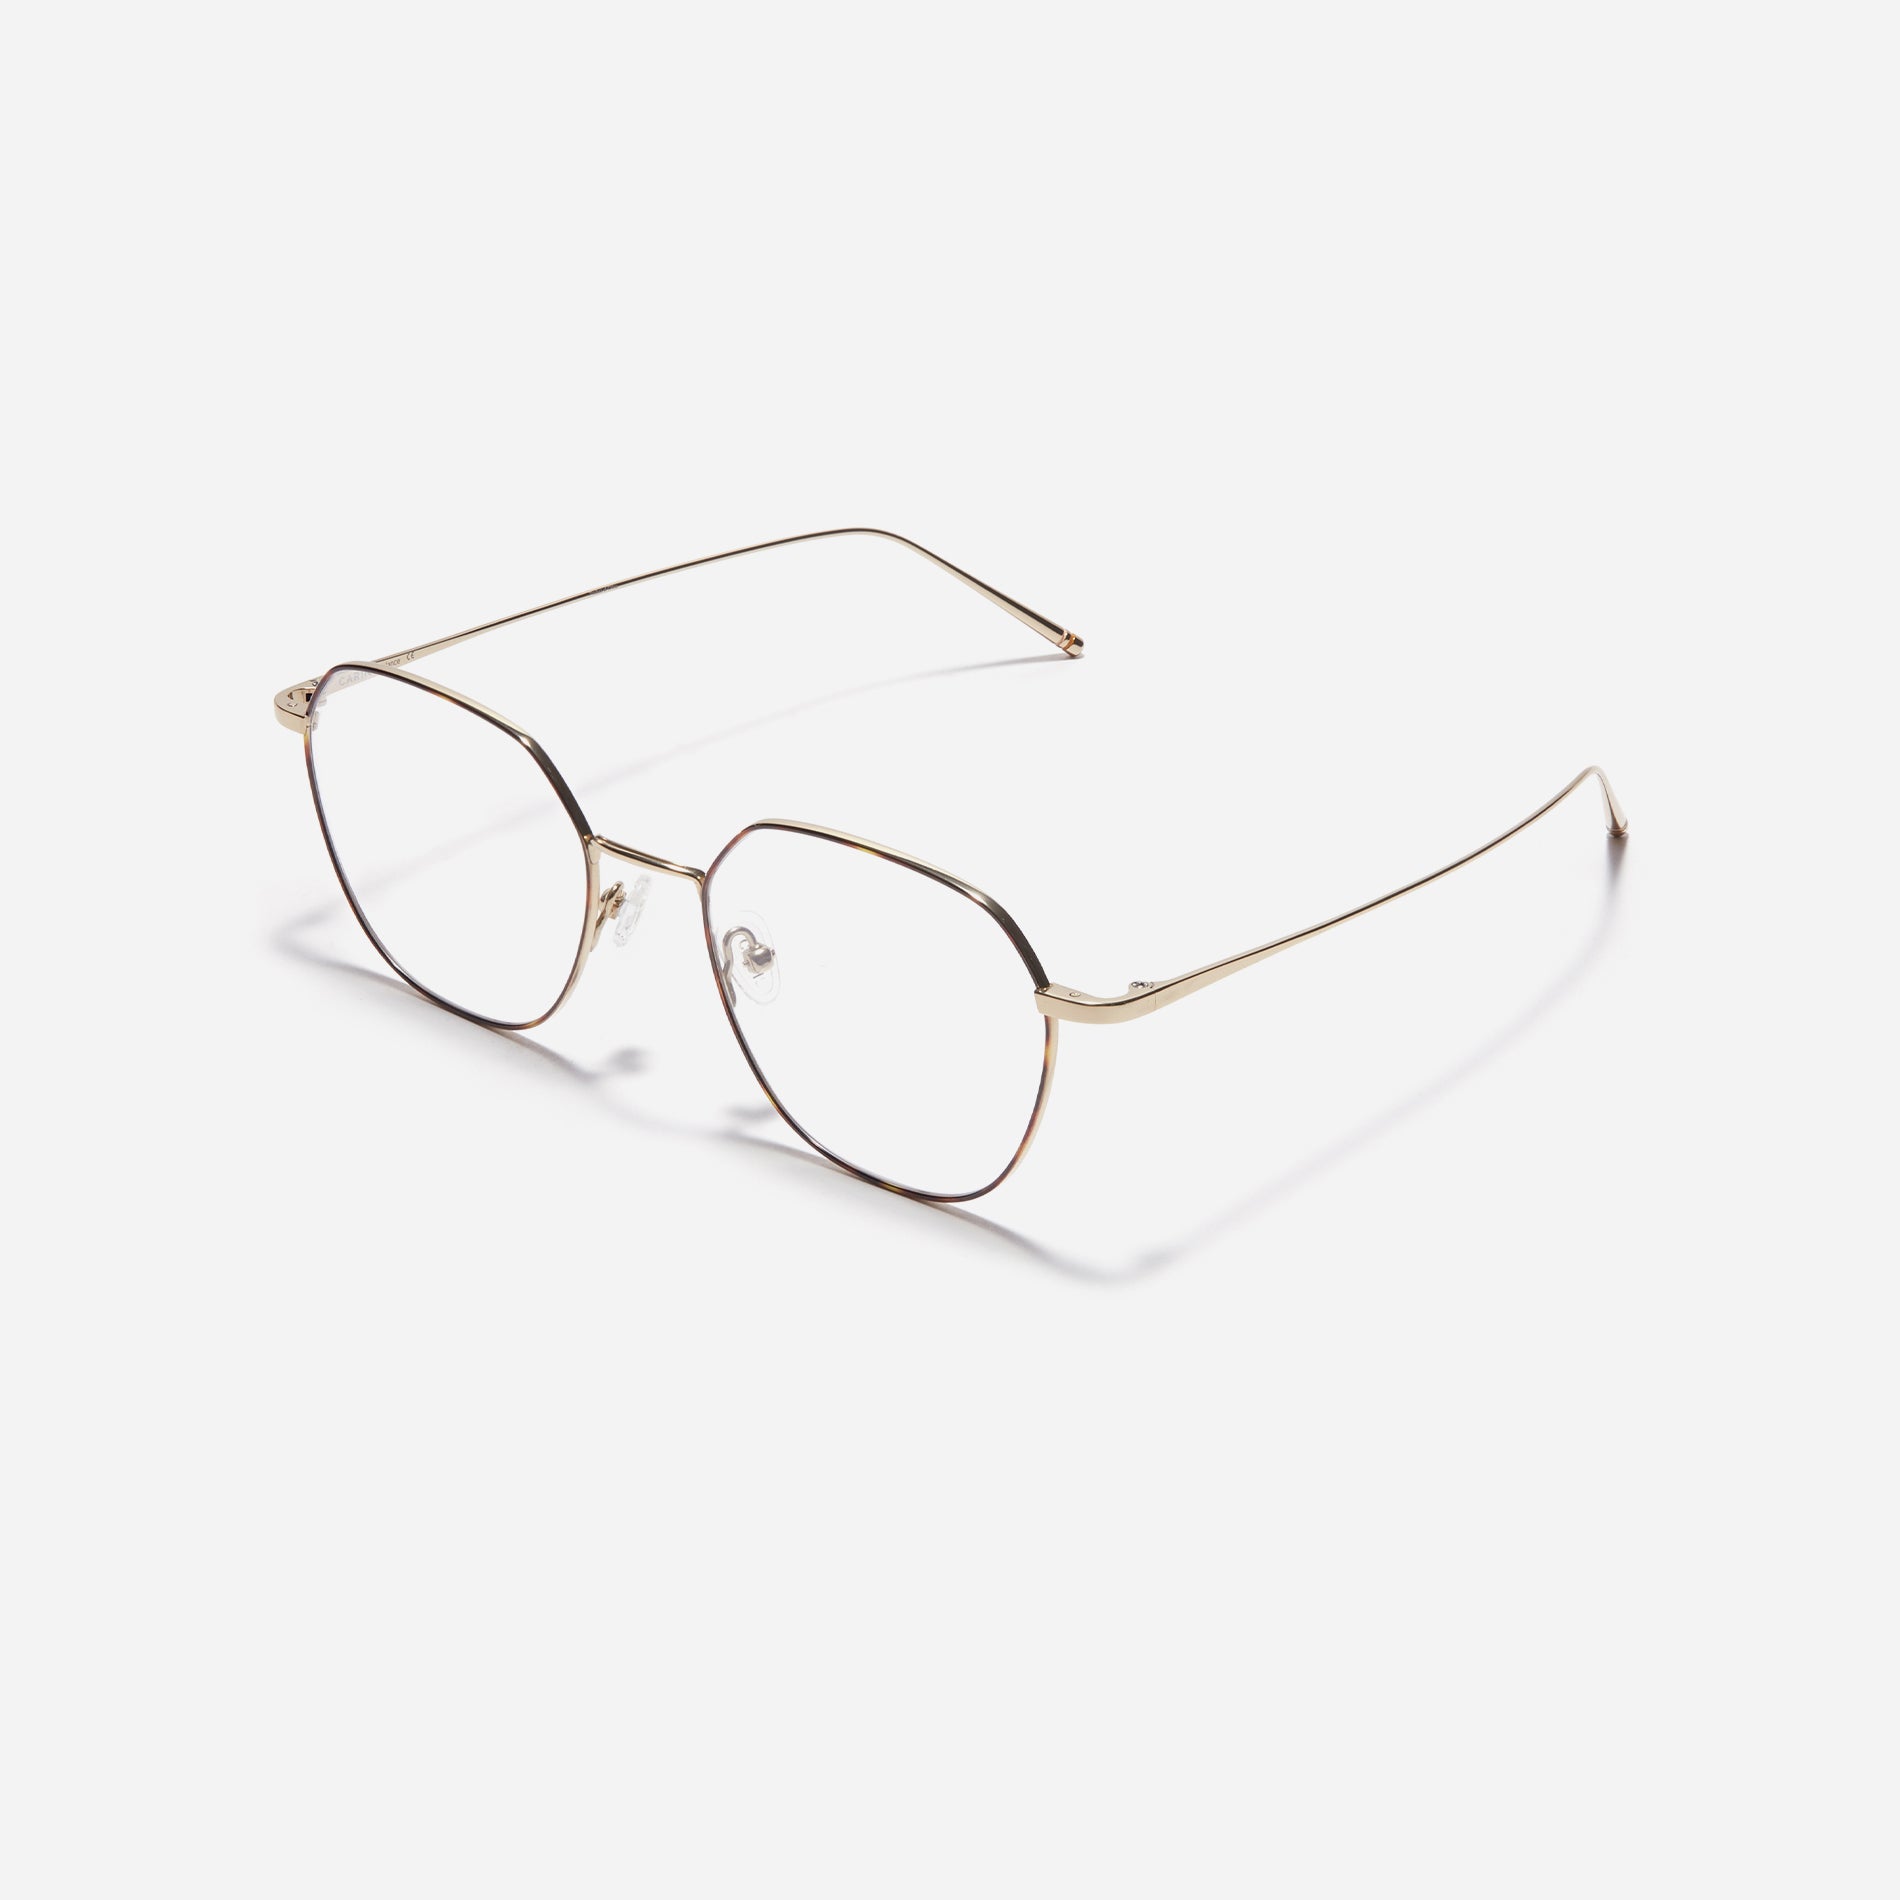 Norman glasses feature a polygonal shape with oversized rims. Crafted entirely from titanium, they are lightweight and comfortable to wear. Available in four different colors, these glasses offer fashionable styles suitable for both men and women.